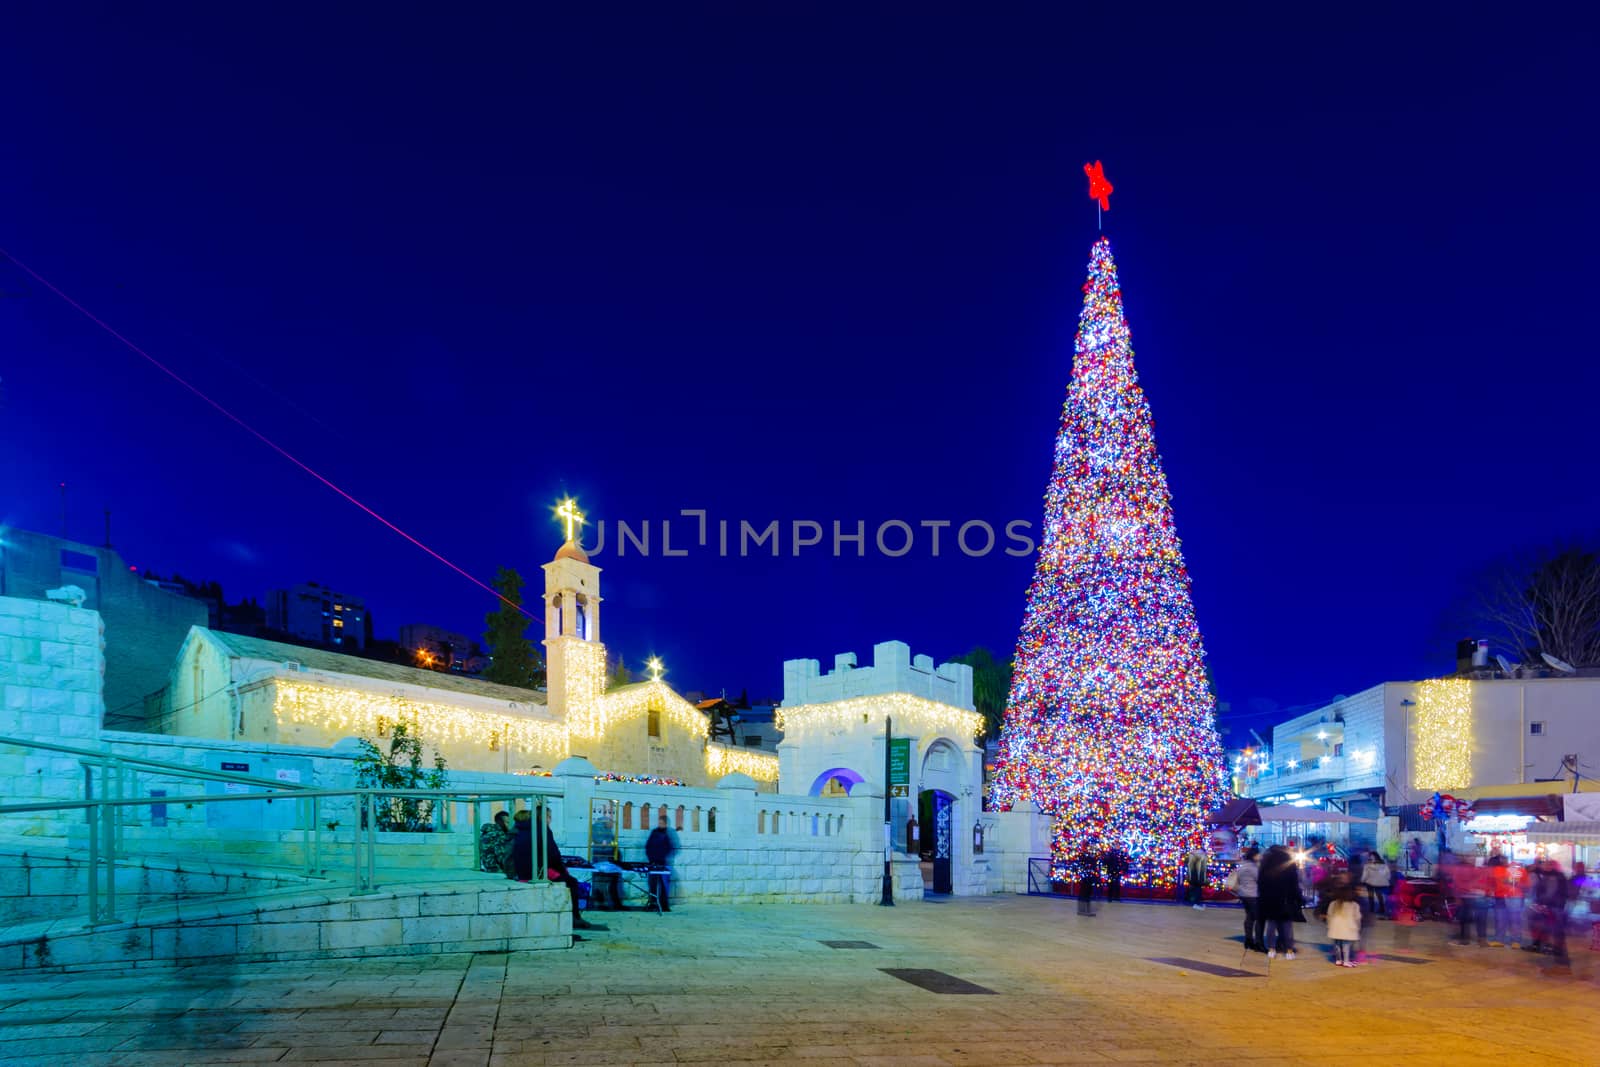 NAZARETH, ISRAEL - DECEMBER 20, 2016: Christmas scene of Mary Well square, with the Greek Orthodox Church of the Annunciation, a Christmas tree, locals and tourists, in Nazareth, Israel